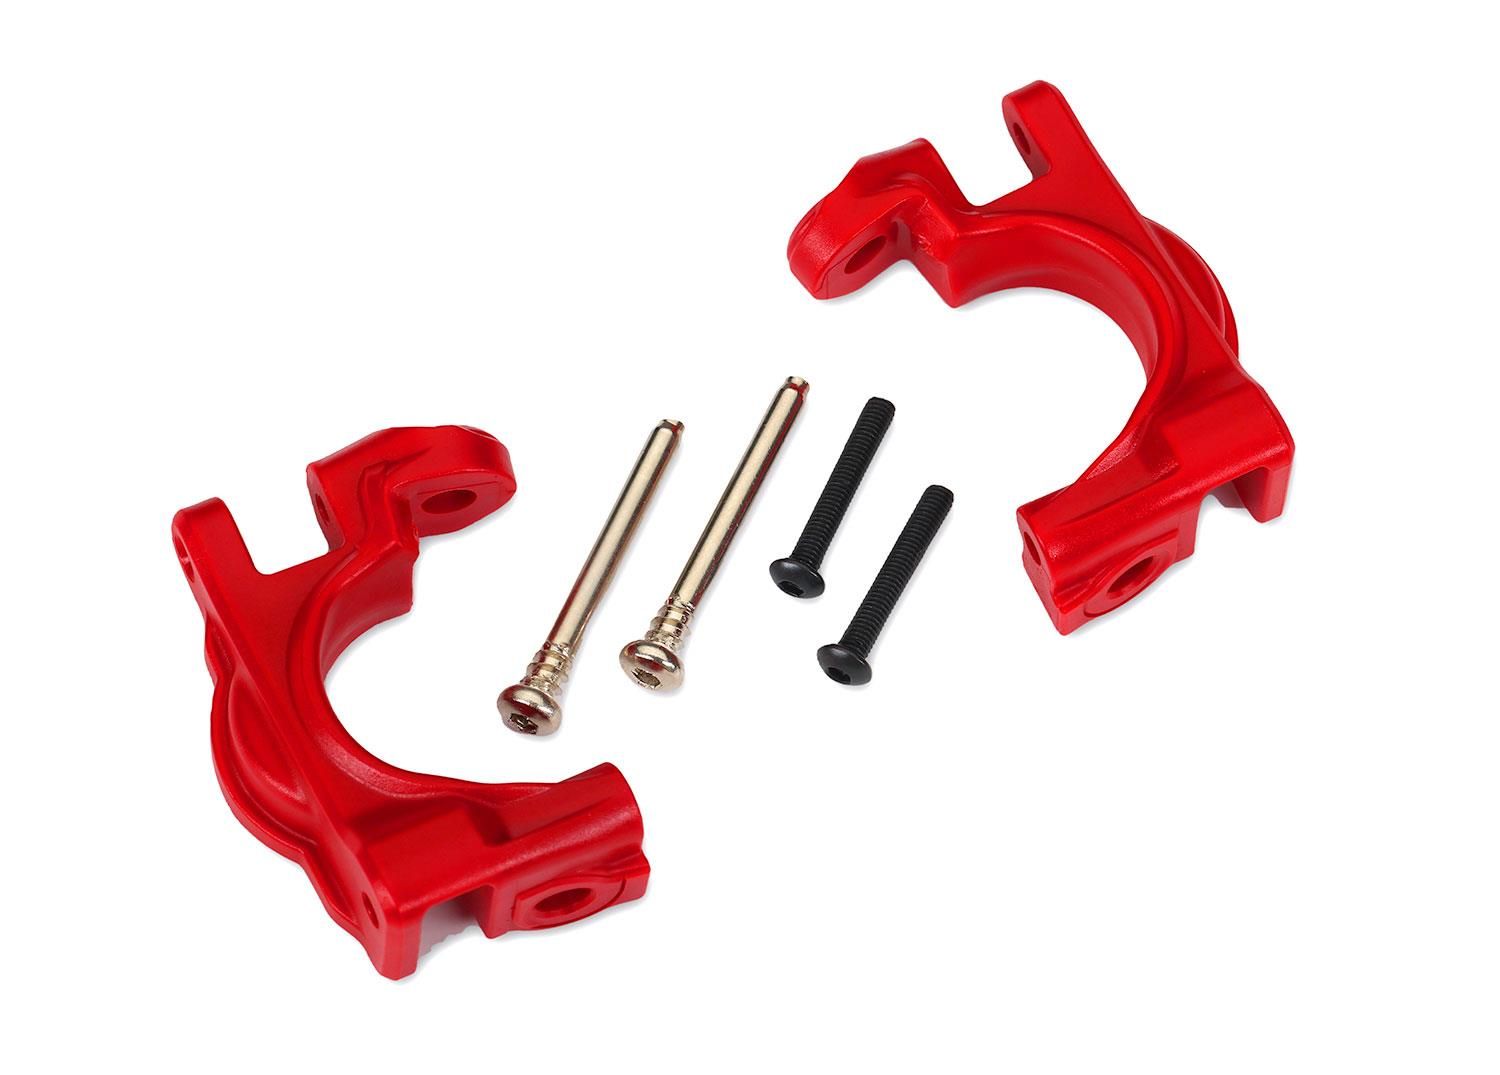 Traxxas - Caster Blocks Left/Right (for use with #9080 upgrade kit) - Red (TRX-9032R)